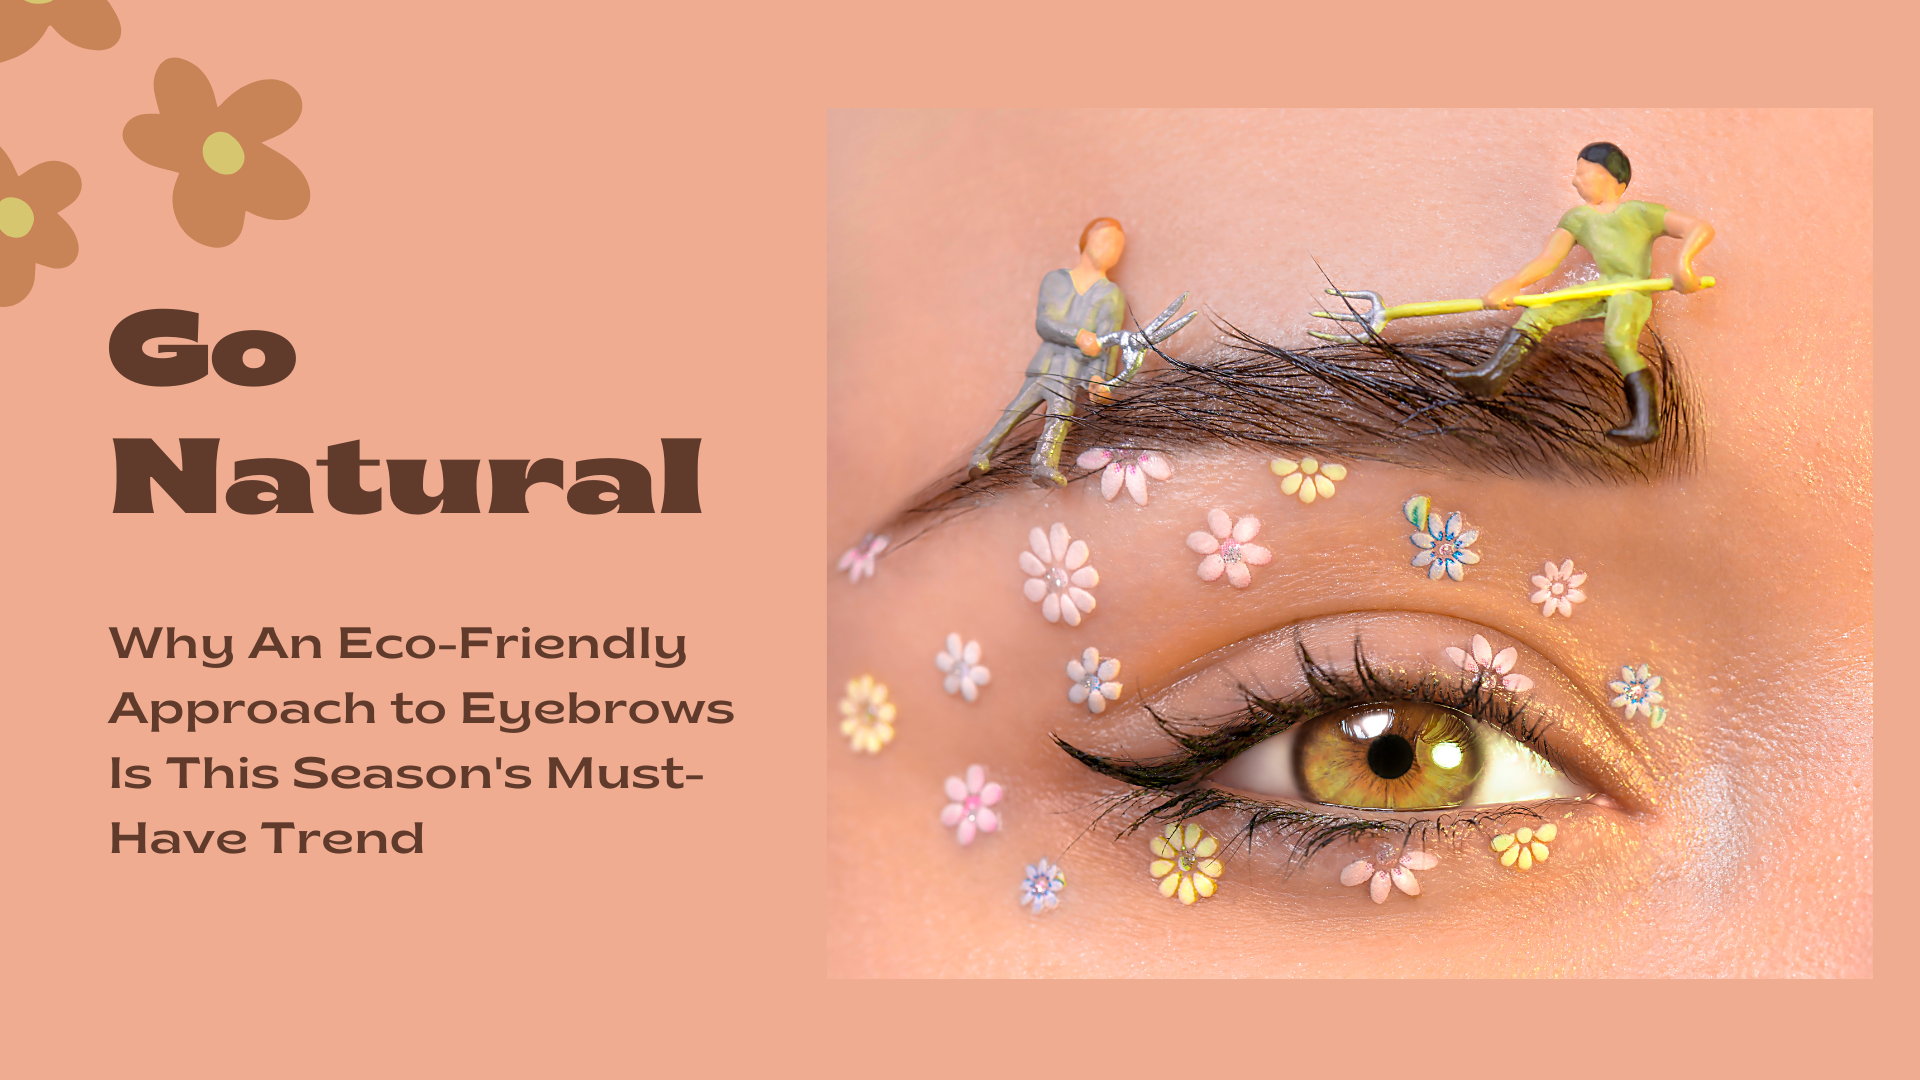 Go Natural! Why An Eco-Friendly Approach to Eyebrows Is This Season's Must-Have Trend